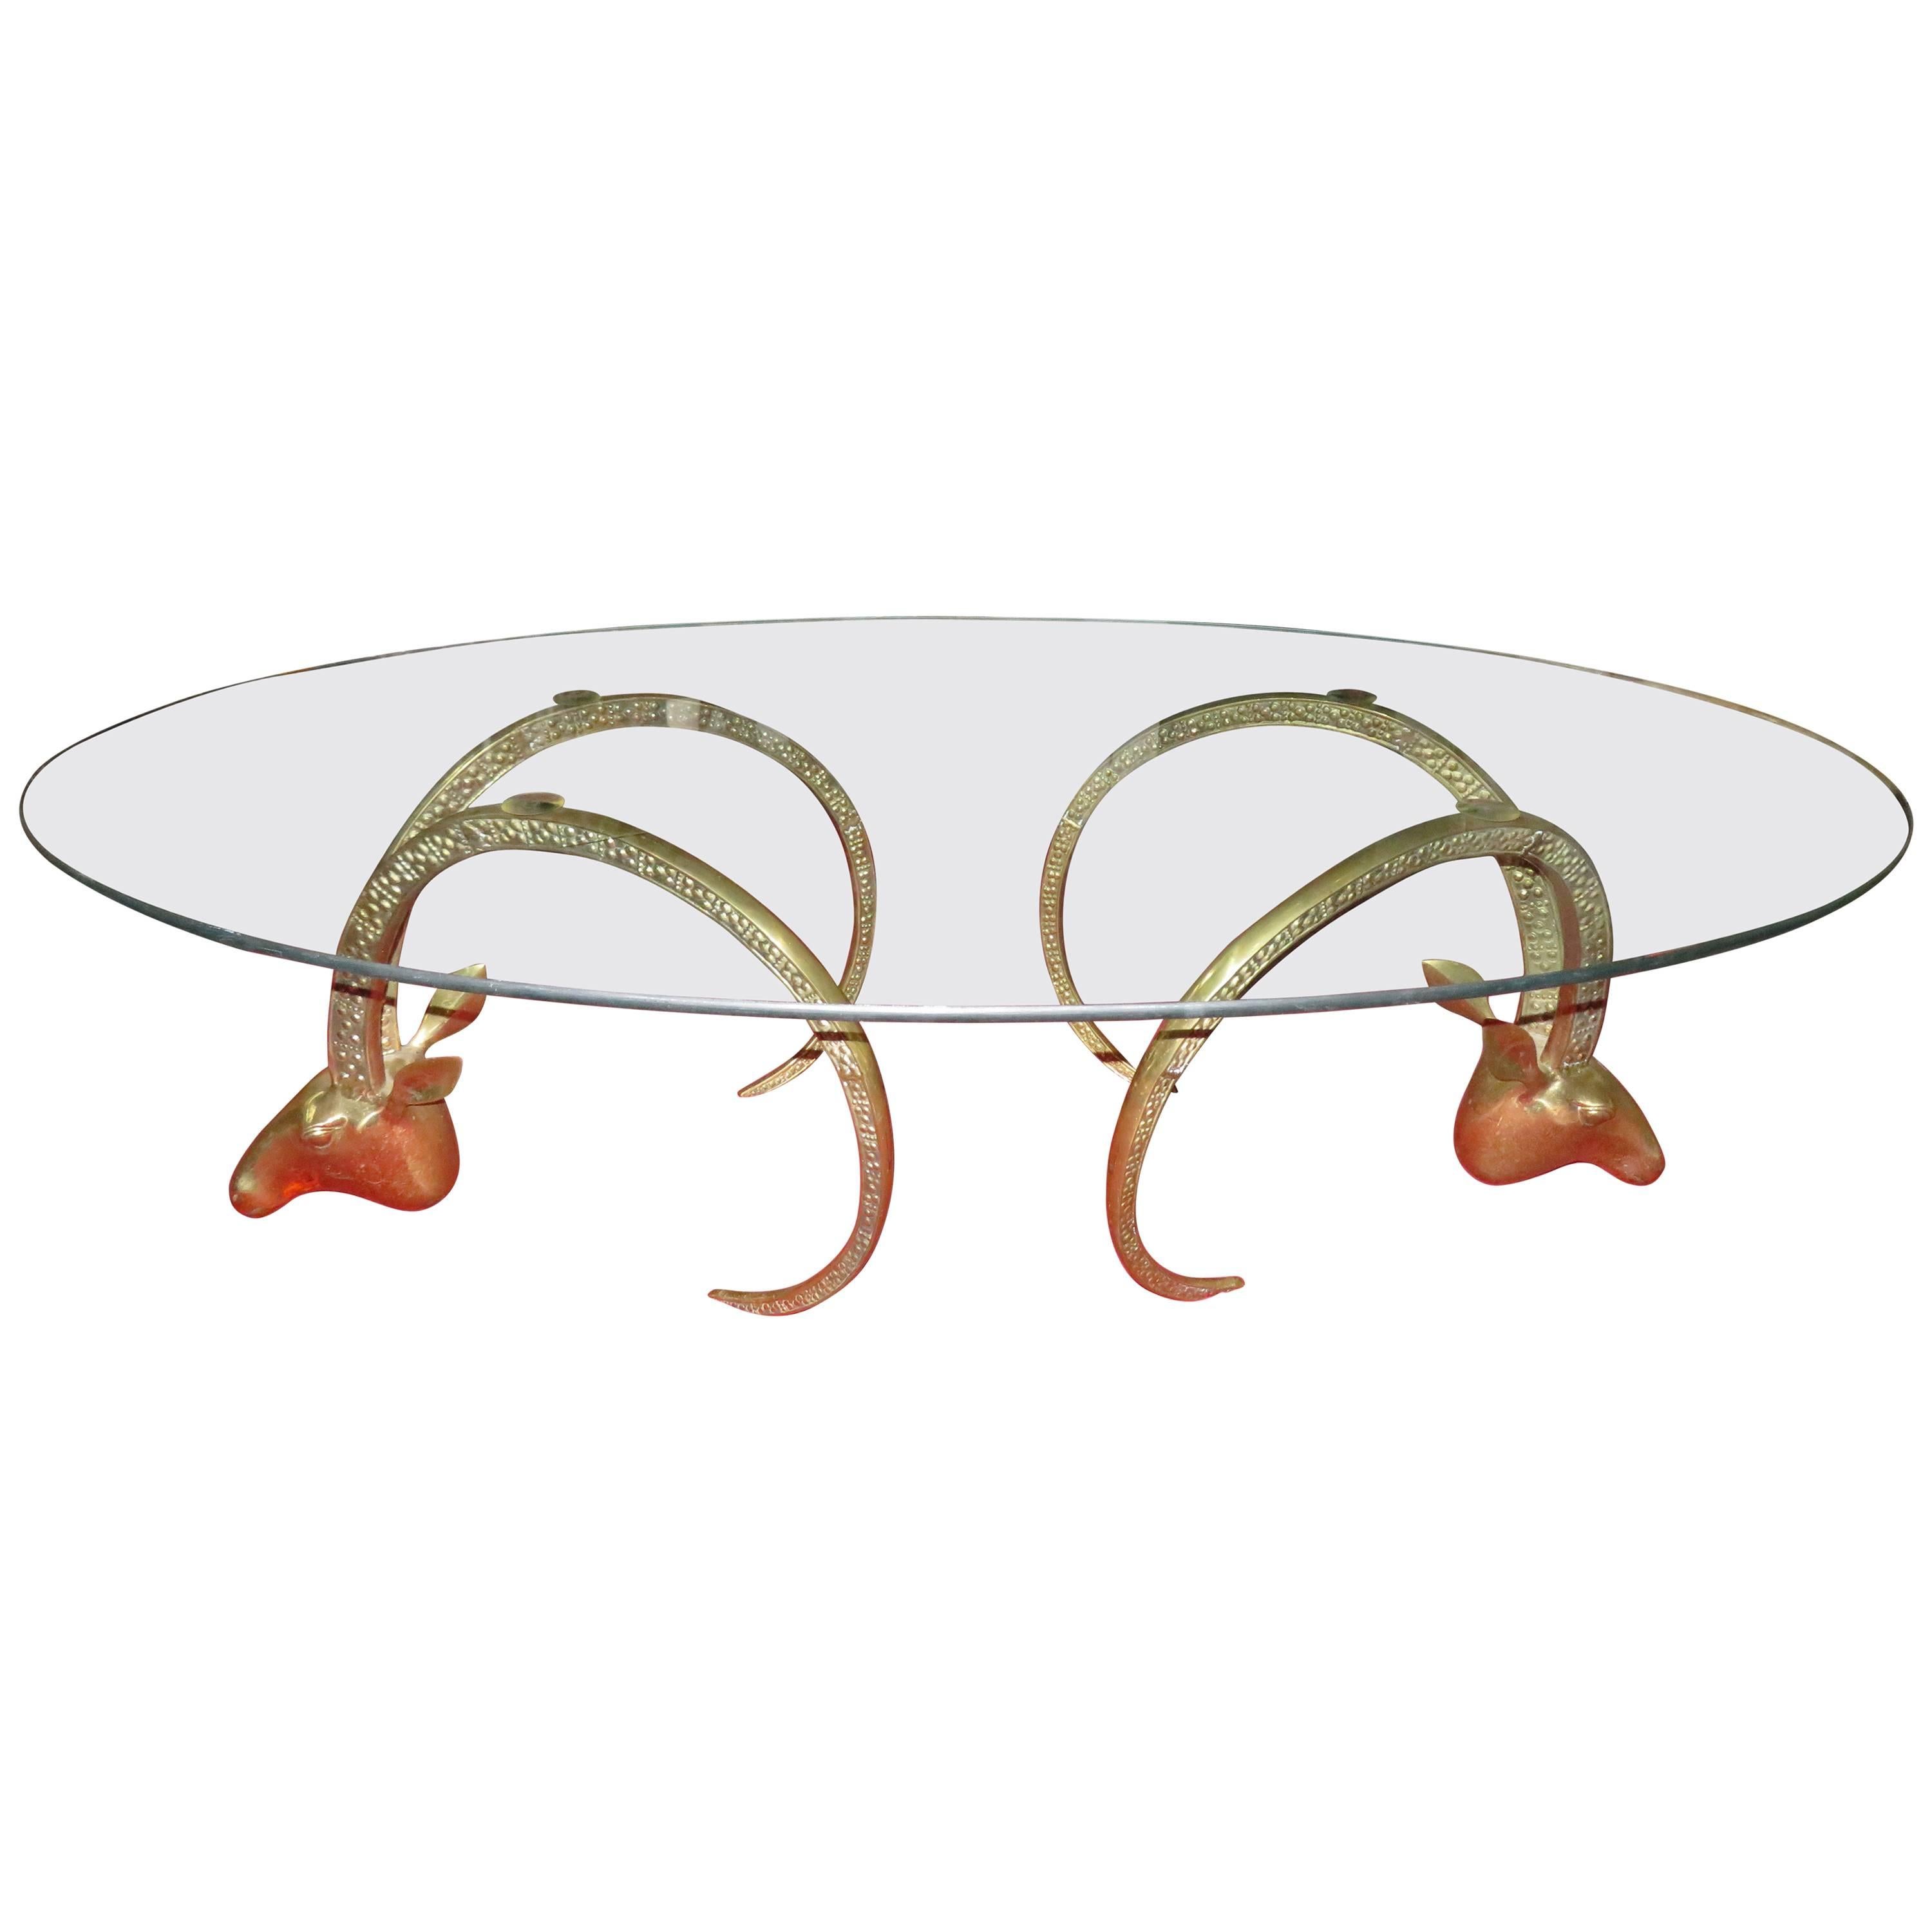 Magnificent Brass Ibex Ram Head Coffee Table Mid-Century Regency Modern For Sale